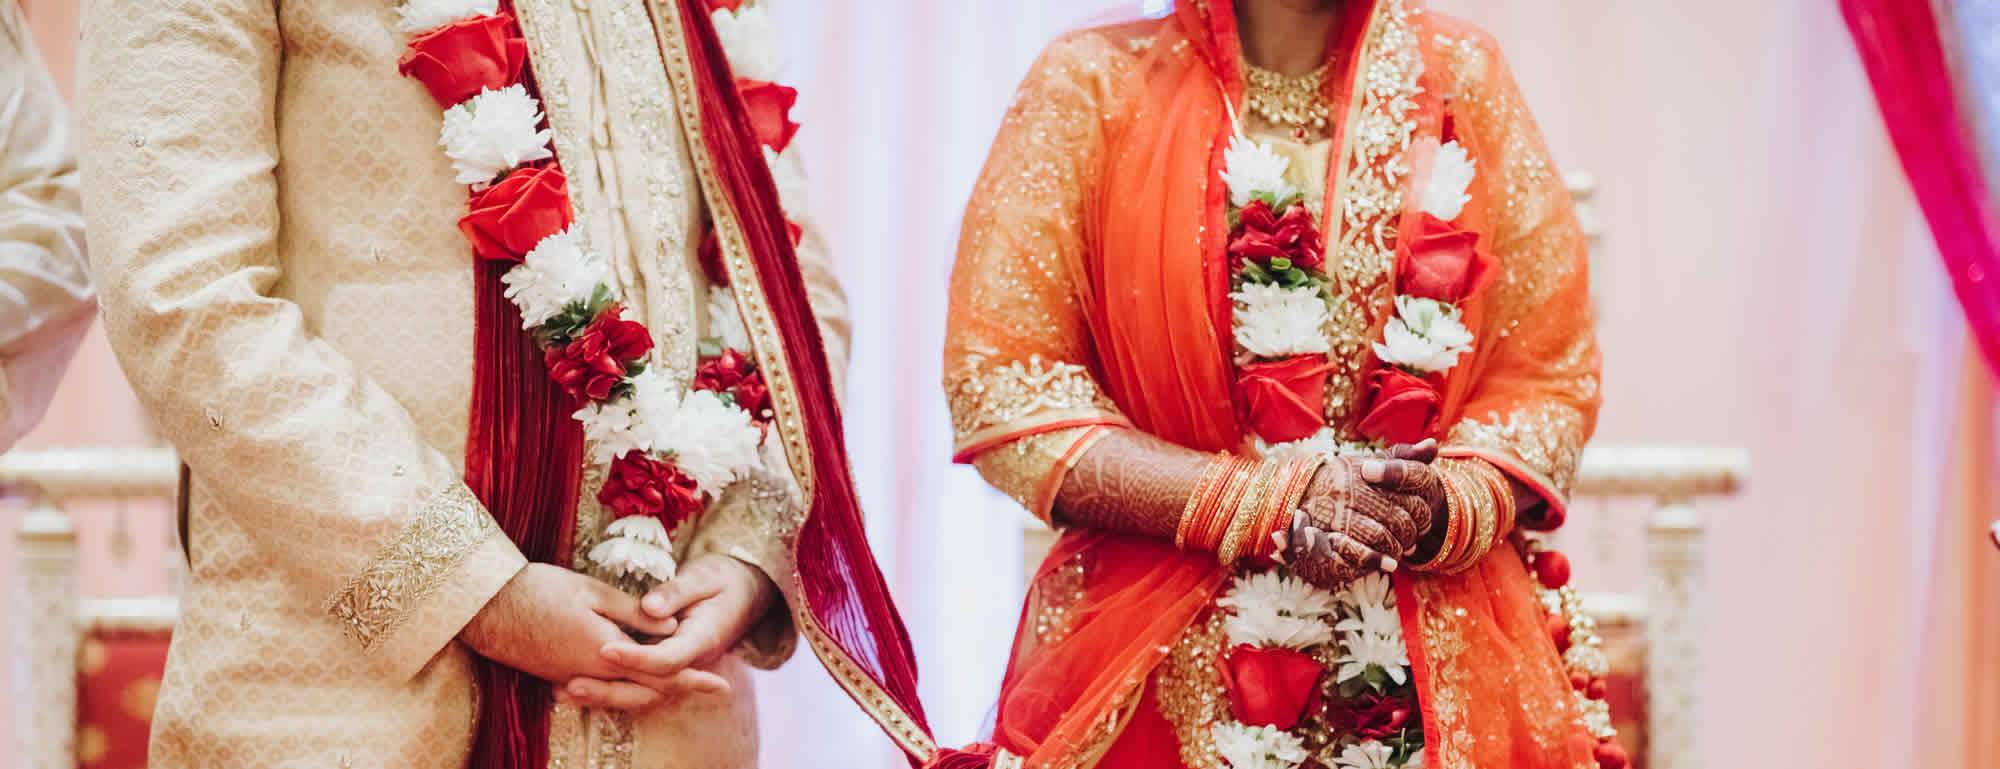 learn about complete information about arya samaj marriage process